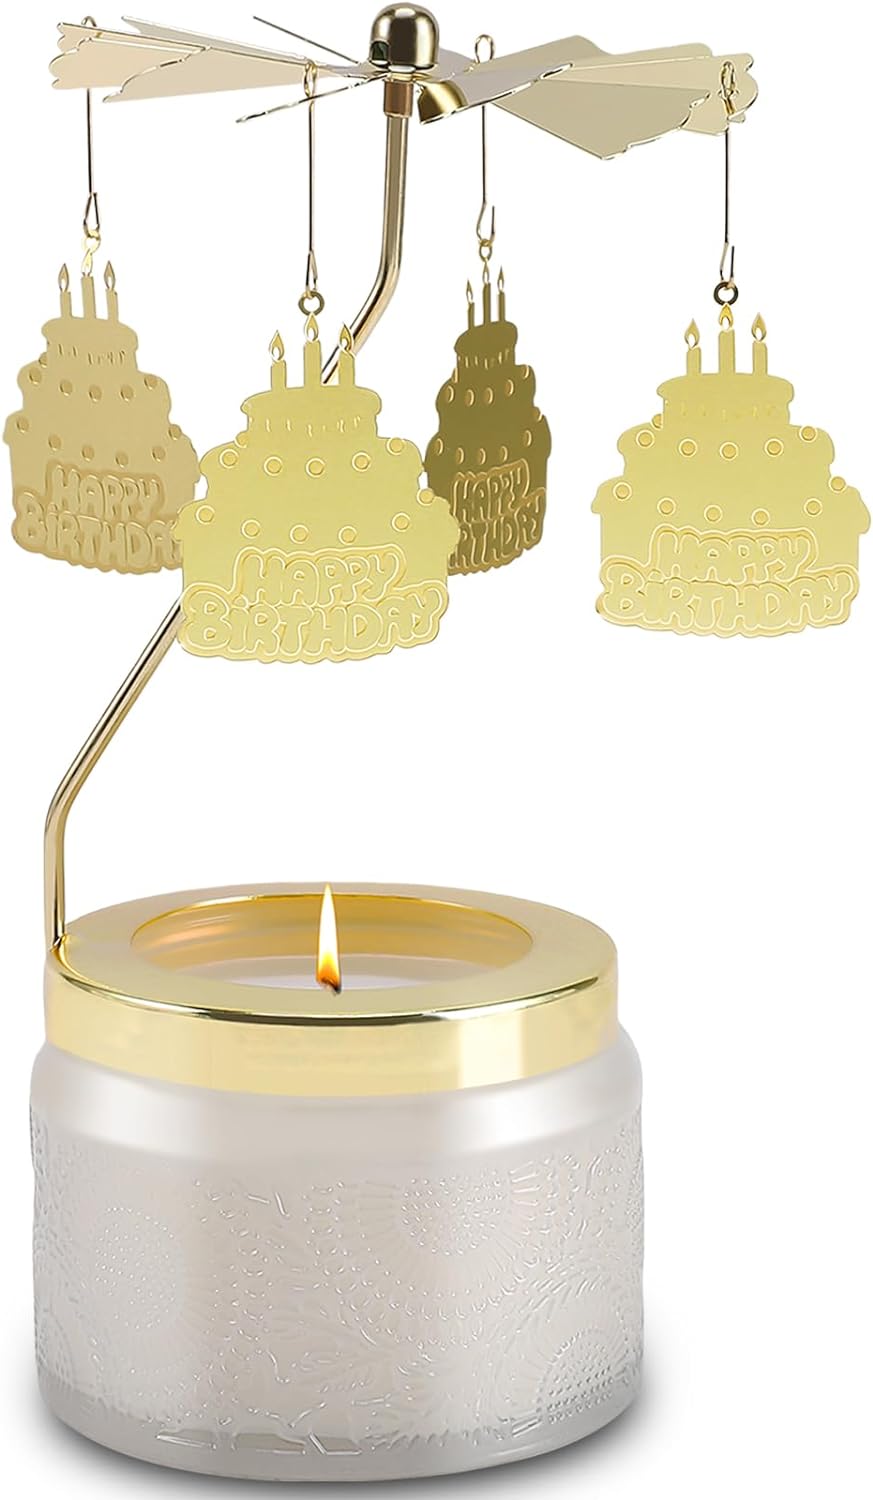 Gifts for Women | Birthday Gifts Rotatable Candle - Vanilla Cream Scented Candles for Home, Birthday Gifts for Women, Unique Birthday Gift for Her, Girls, Best Friends